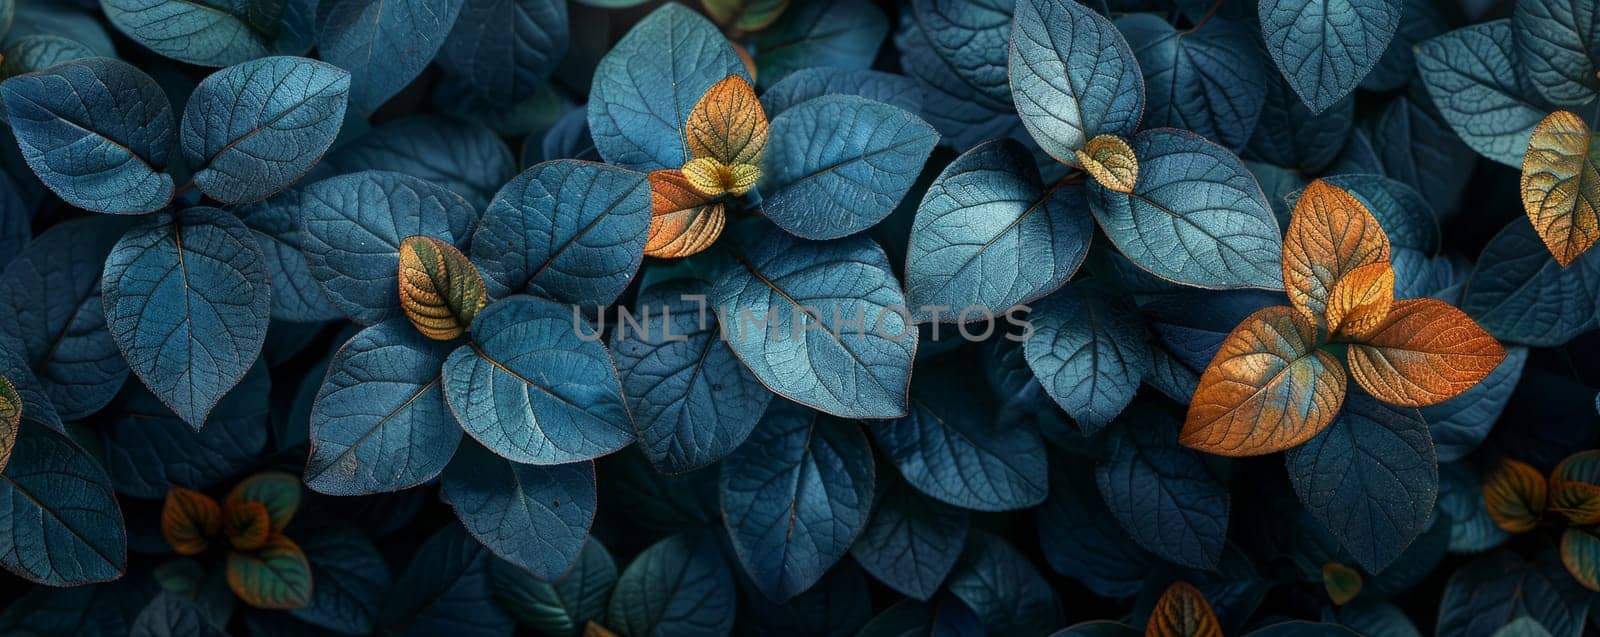 Colorful Monstera leafs background suitable for wallpaper or to represent as backdrop or mockup. by yom98